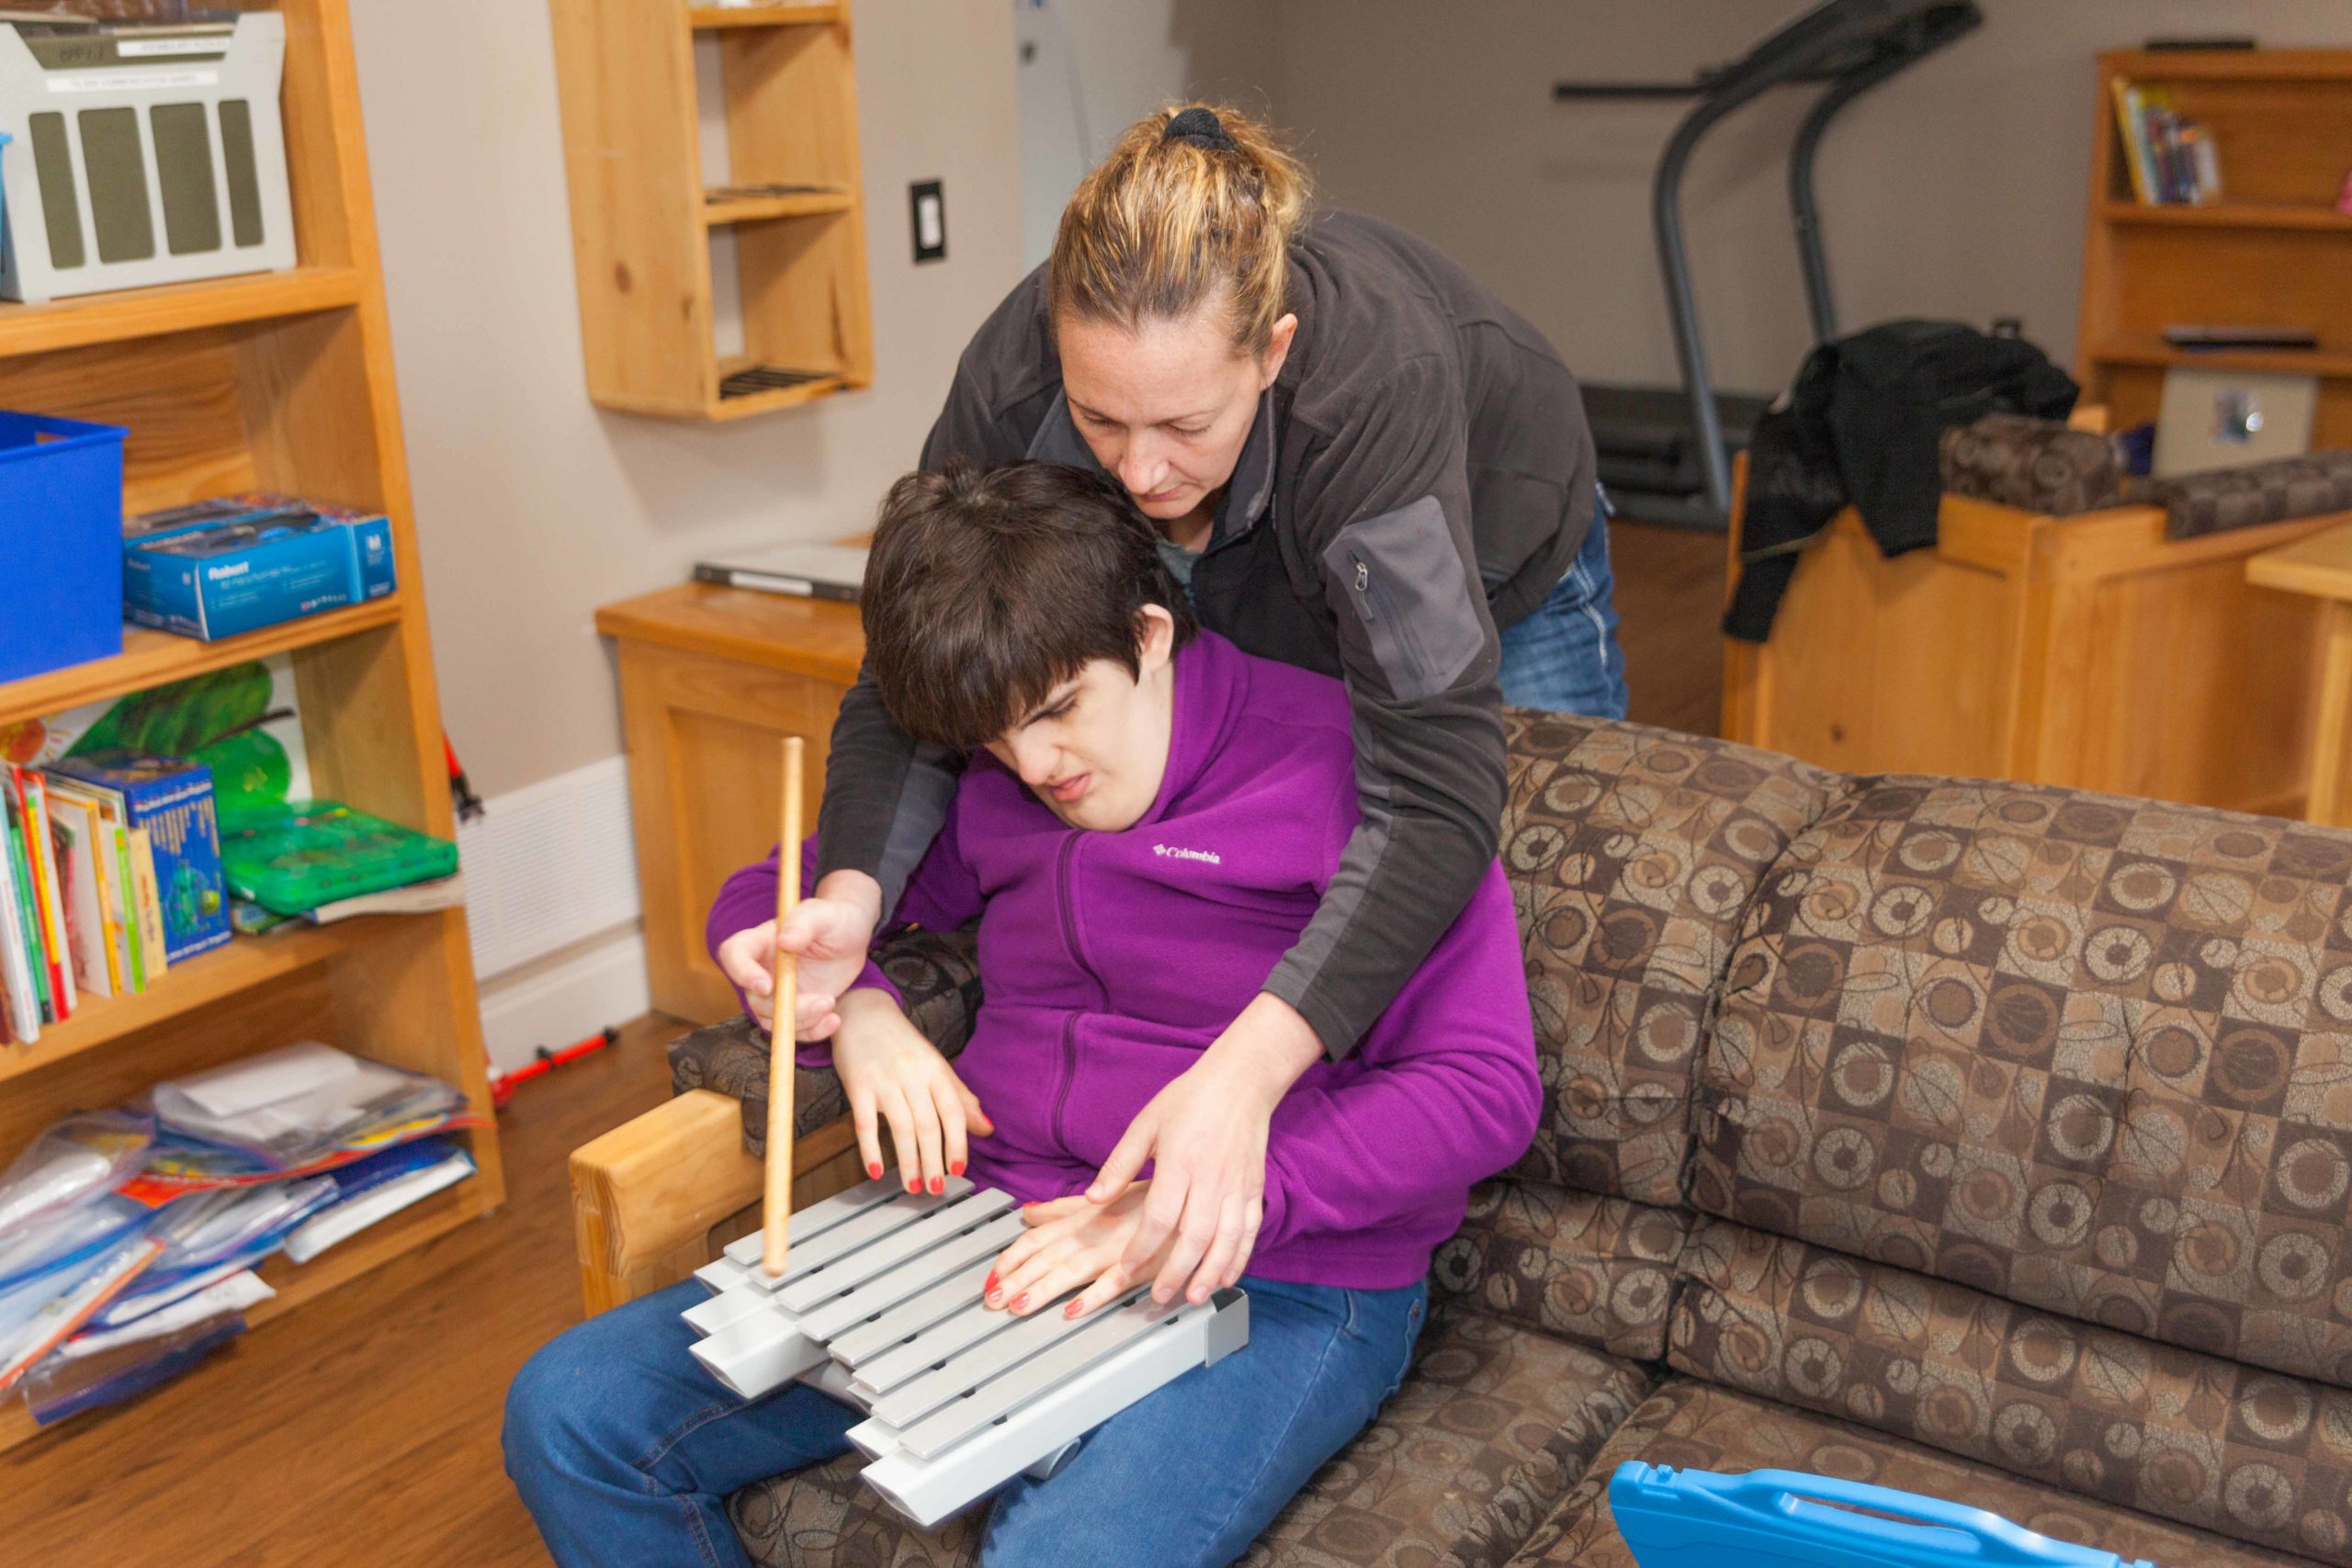 Intervenor stands behind a woman with deafblindness. The intervenor holds the woman’s hands, supporting her in playing the xylophone.